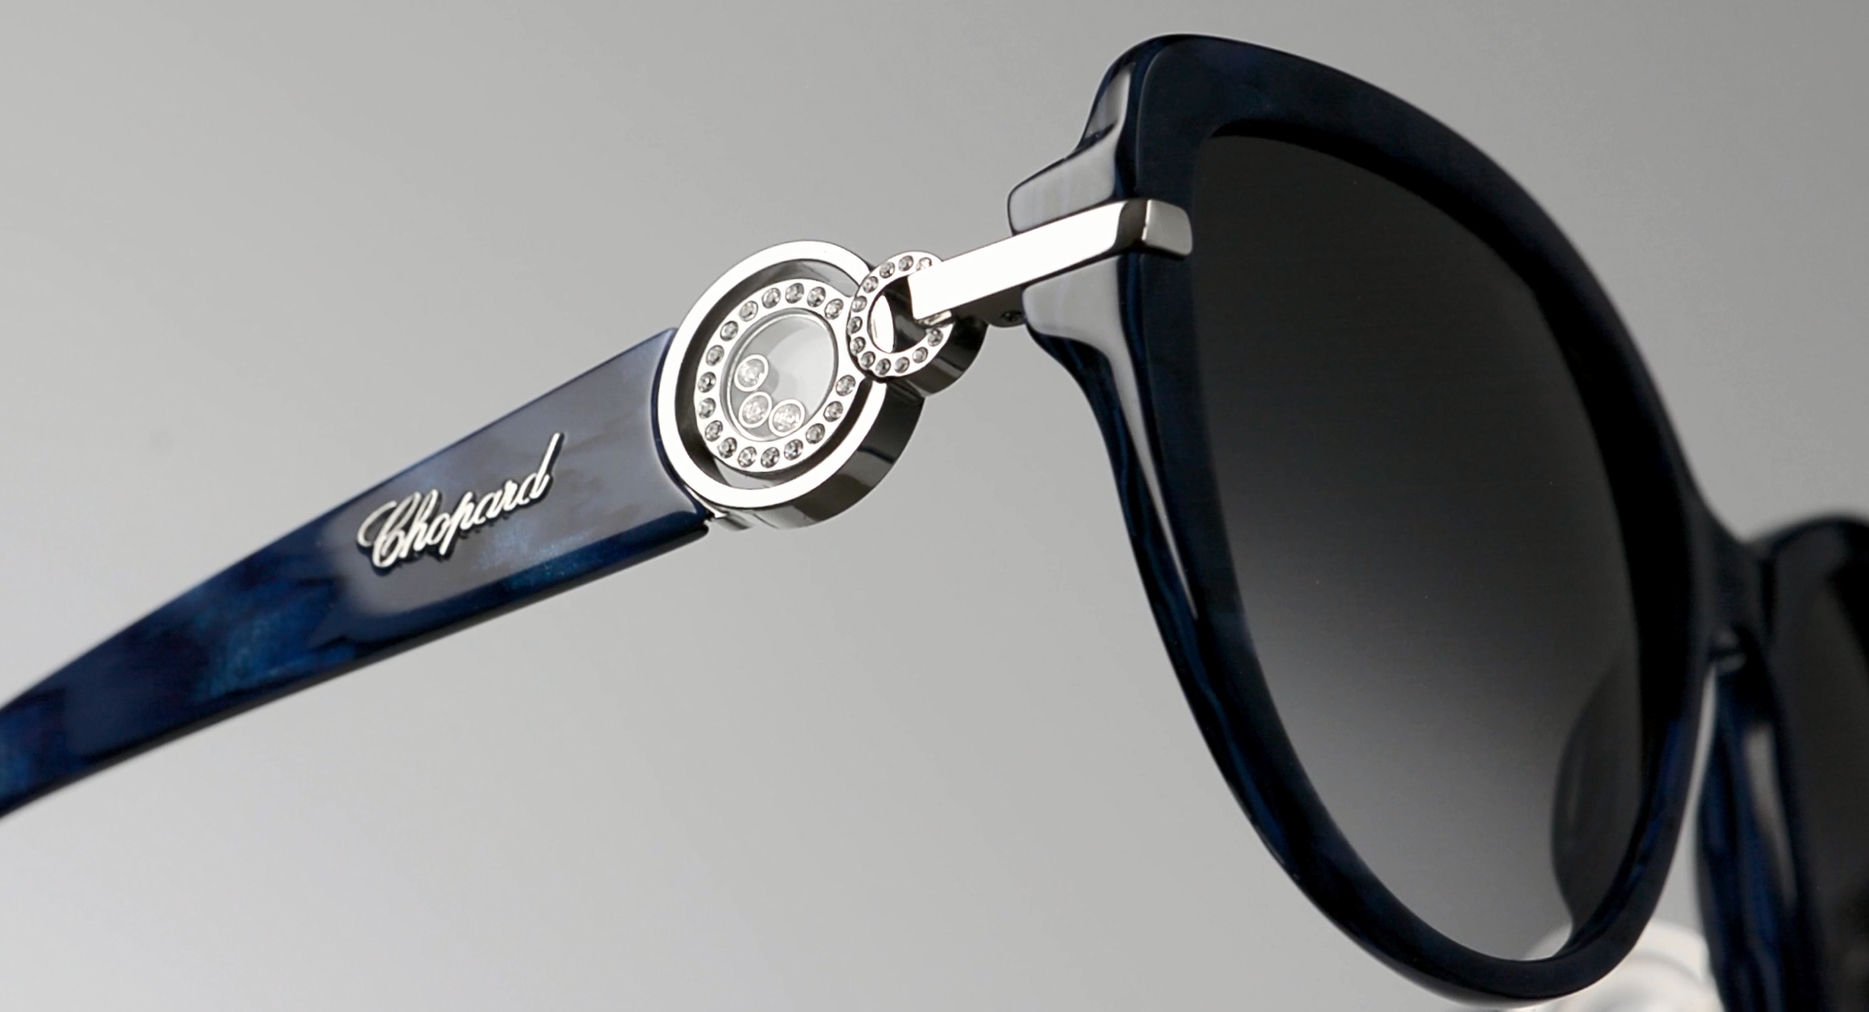 Behind the lens: Chopard’s craftsmanship extends to eyewear